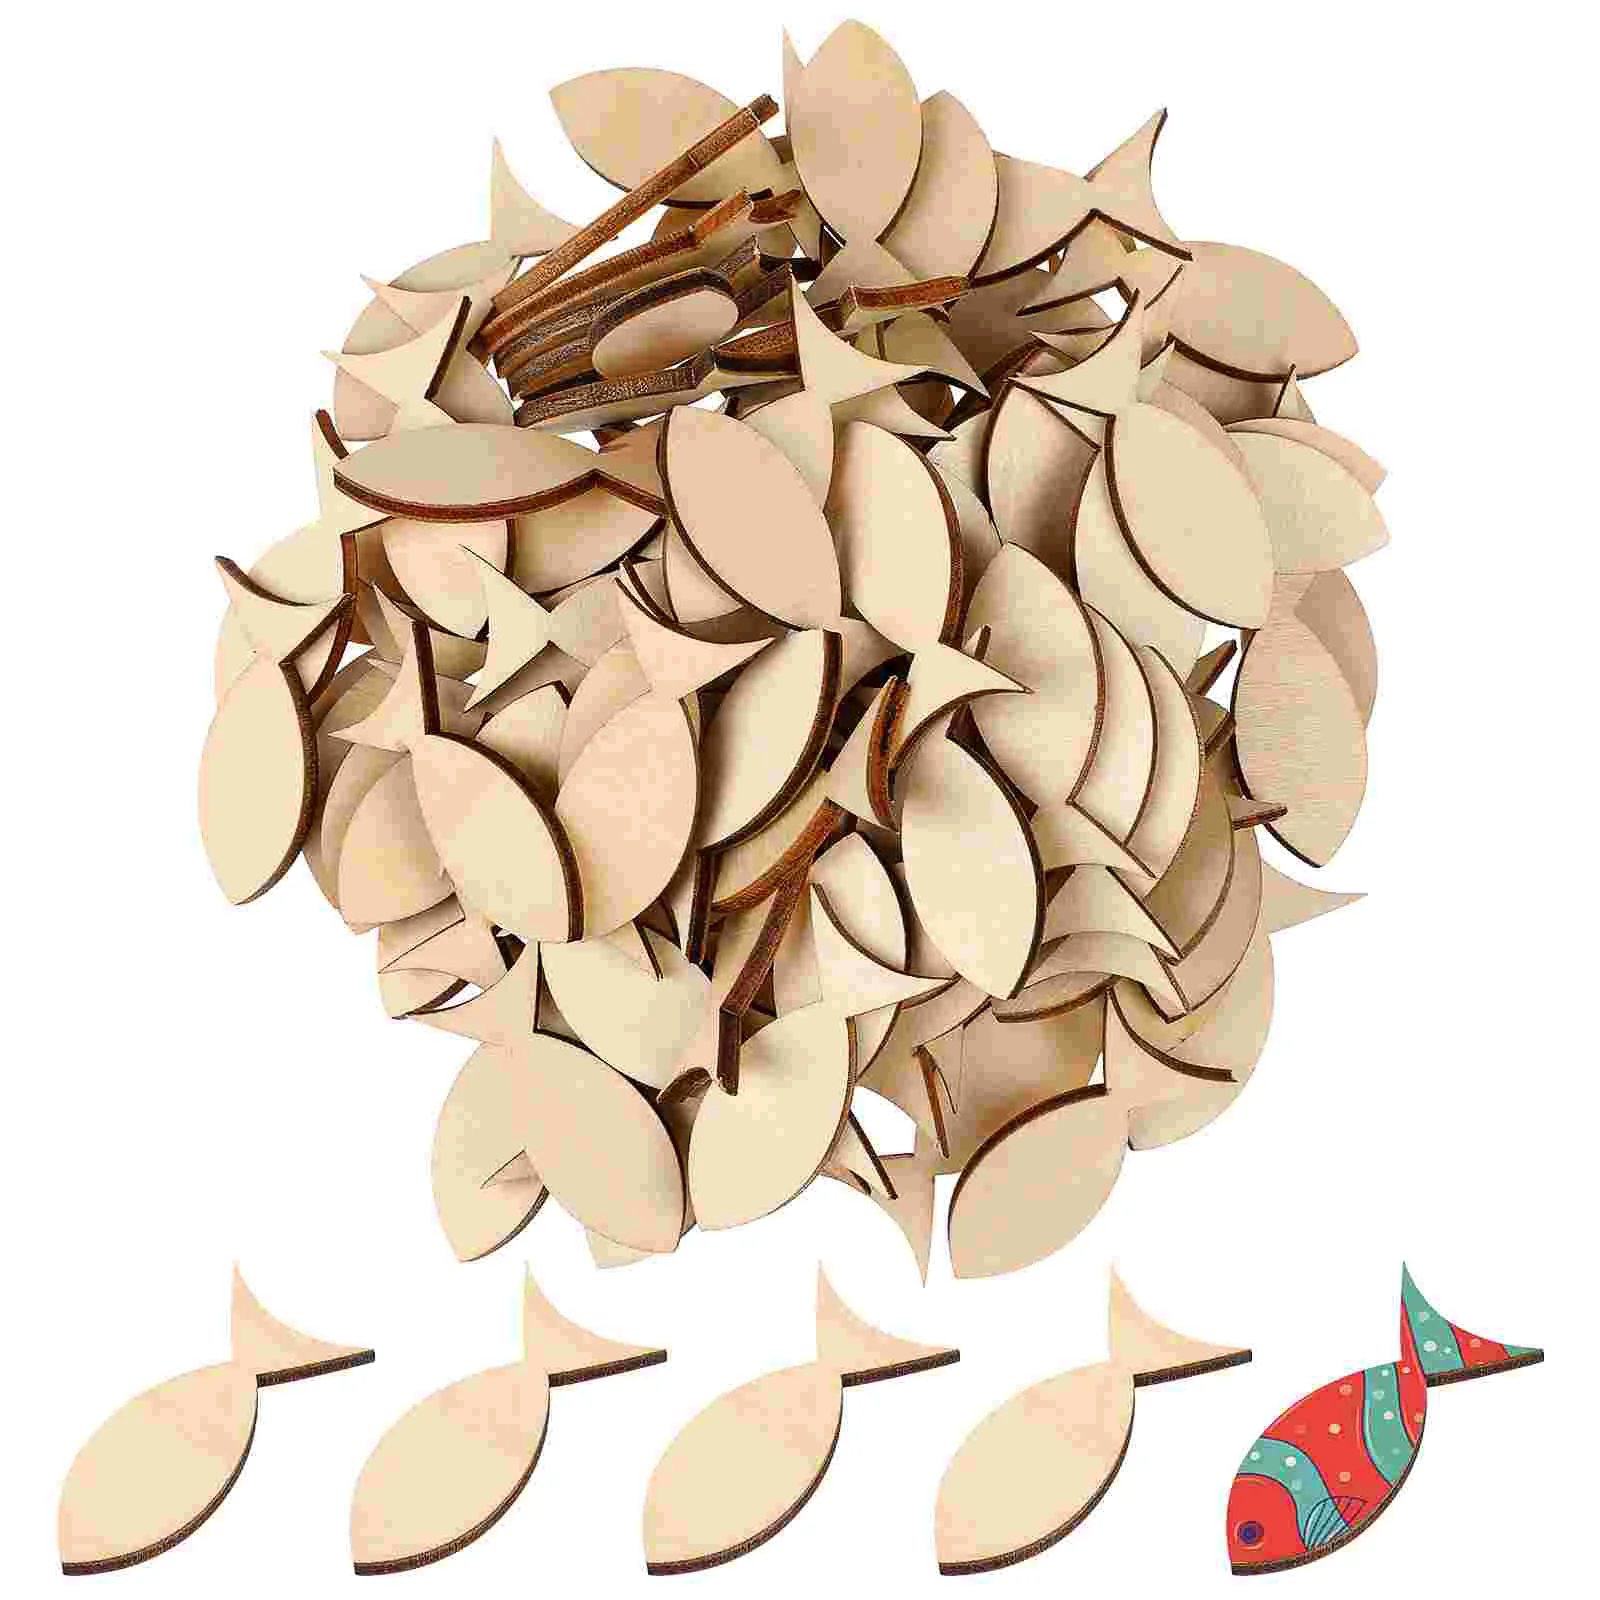 

100 Pcs Wooden Solid Fish Slices Craft Embellishments Card Making Gift Labels Shapes Ornament Crafts Plates